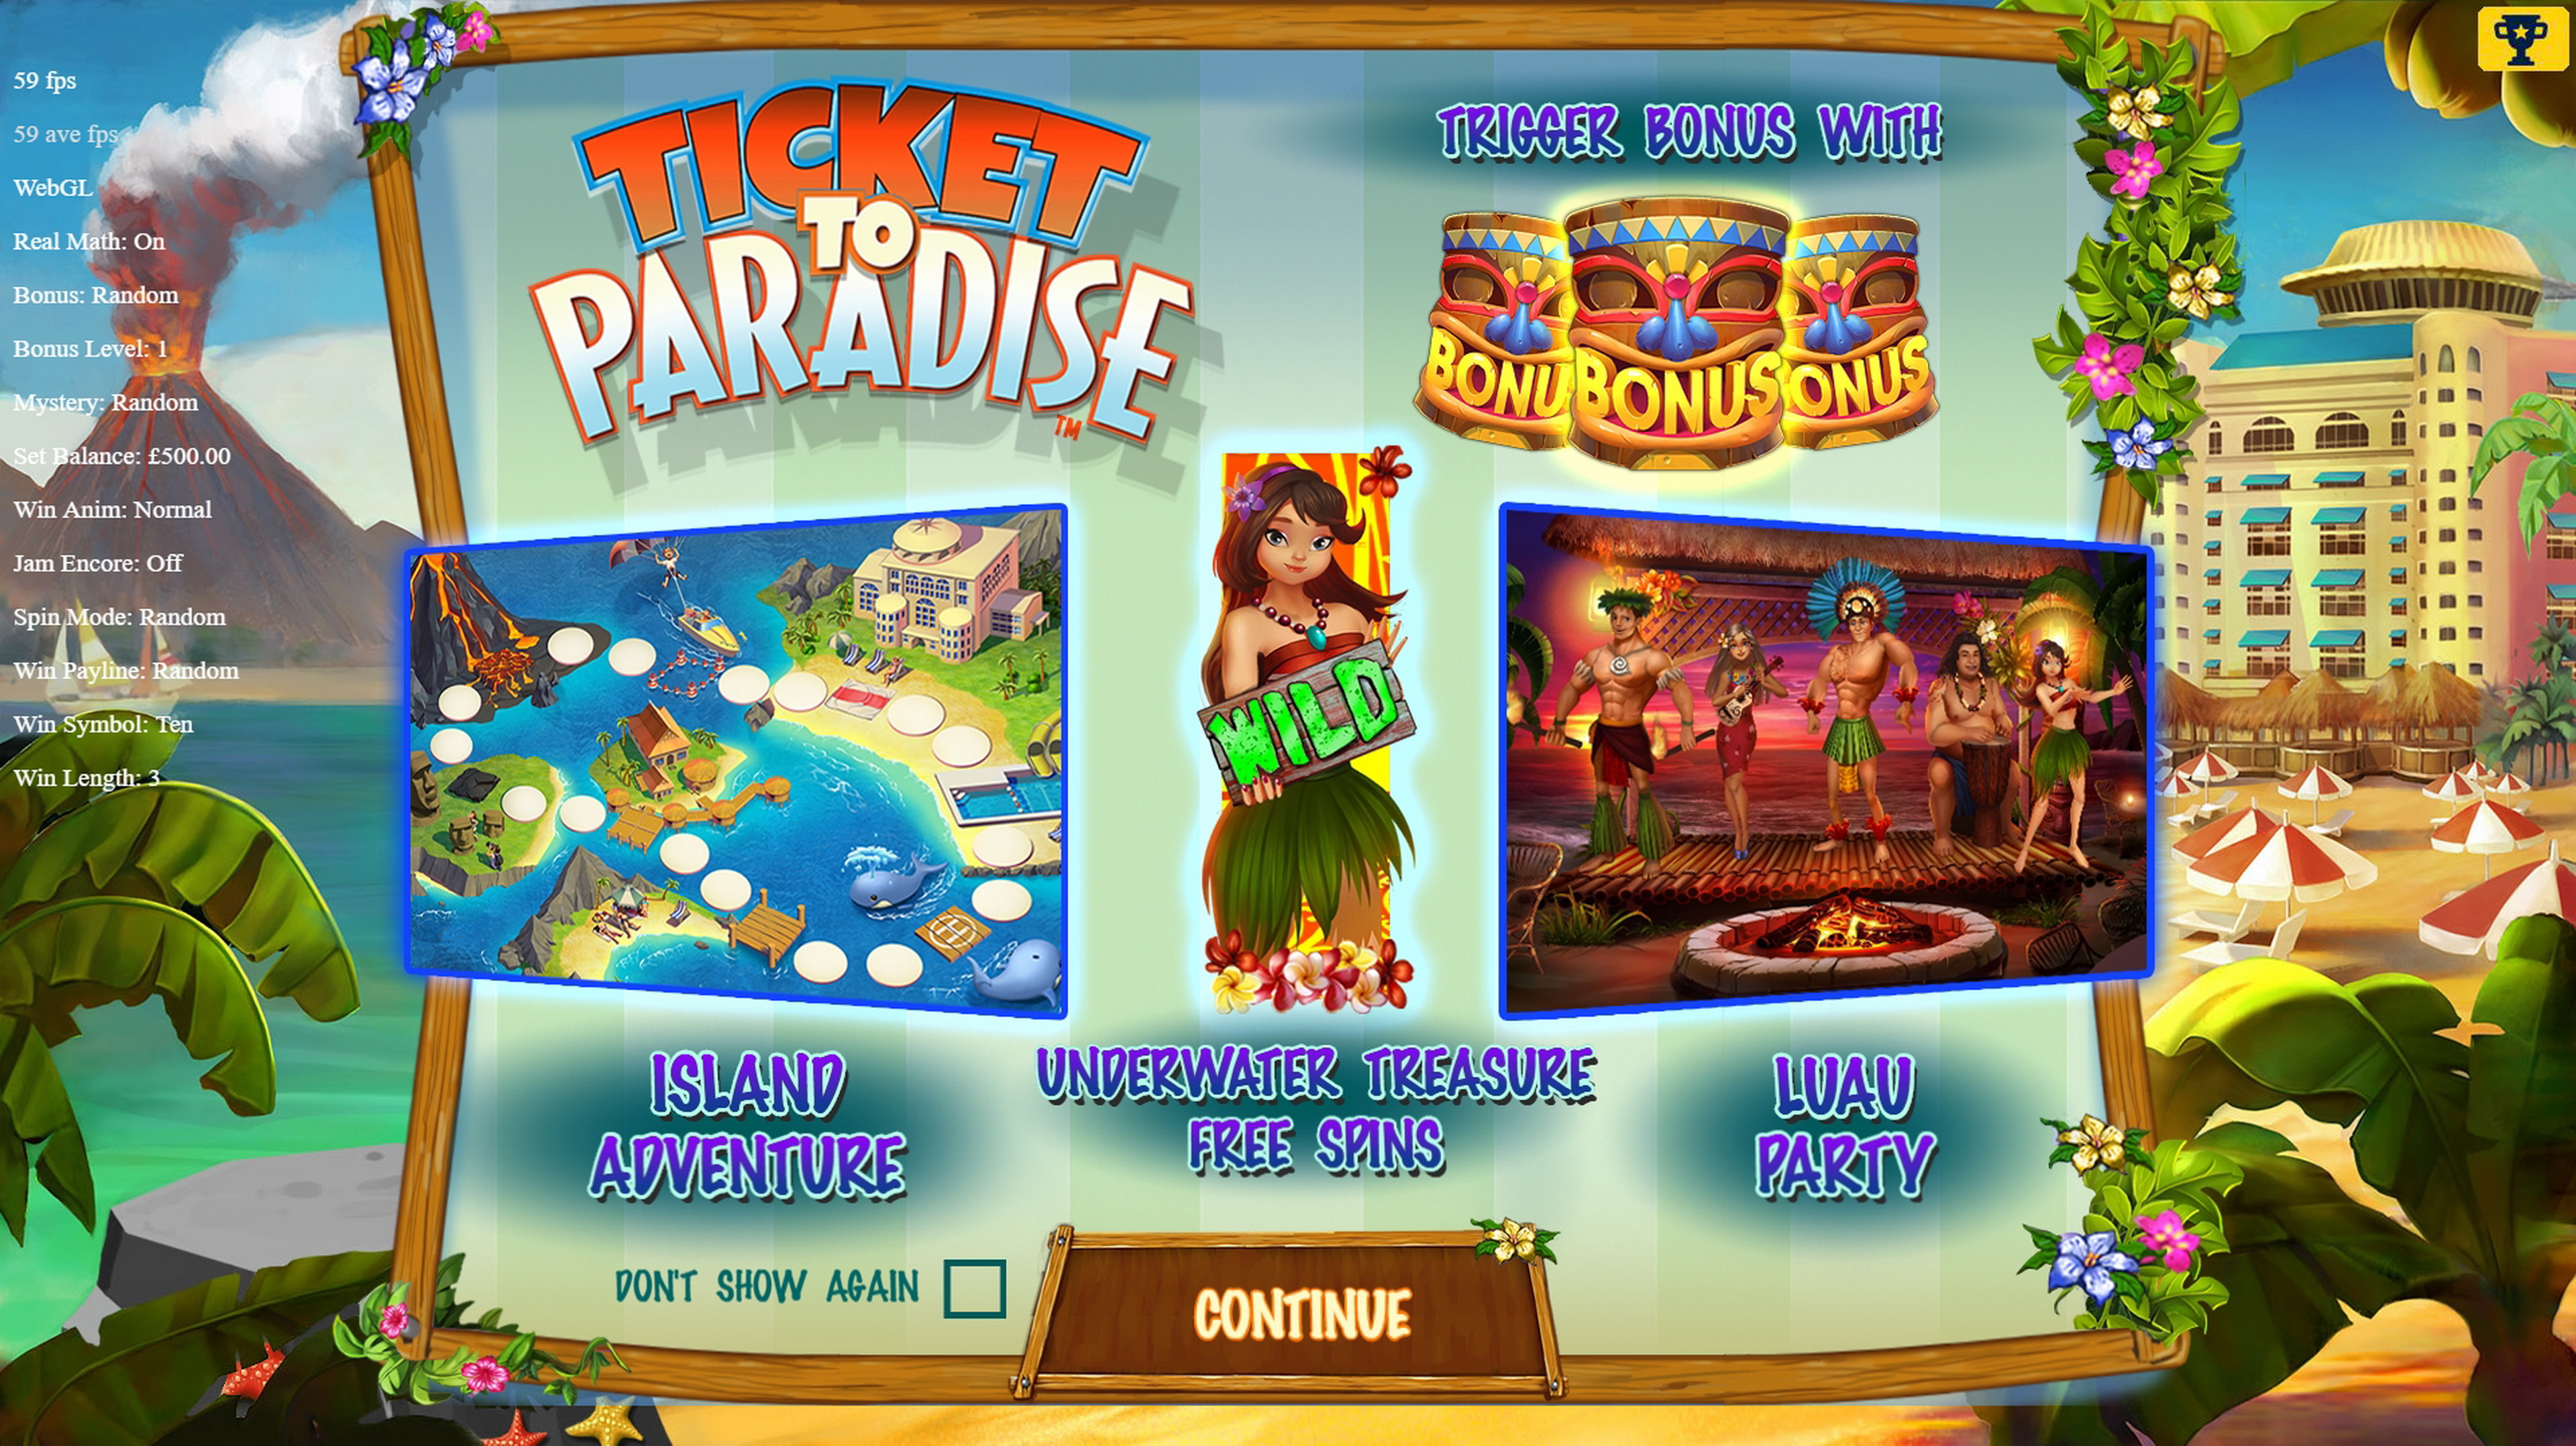 Play Ticket to Paradise Free Casino Slot Game by Asylum Labs